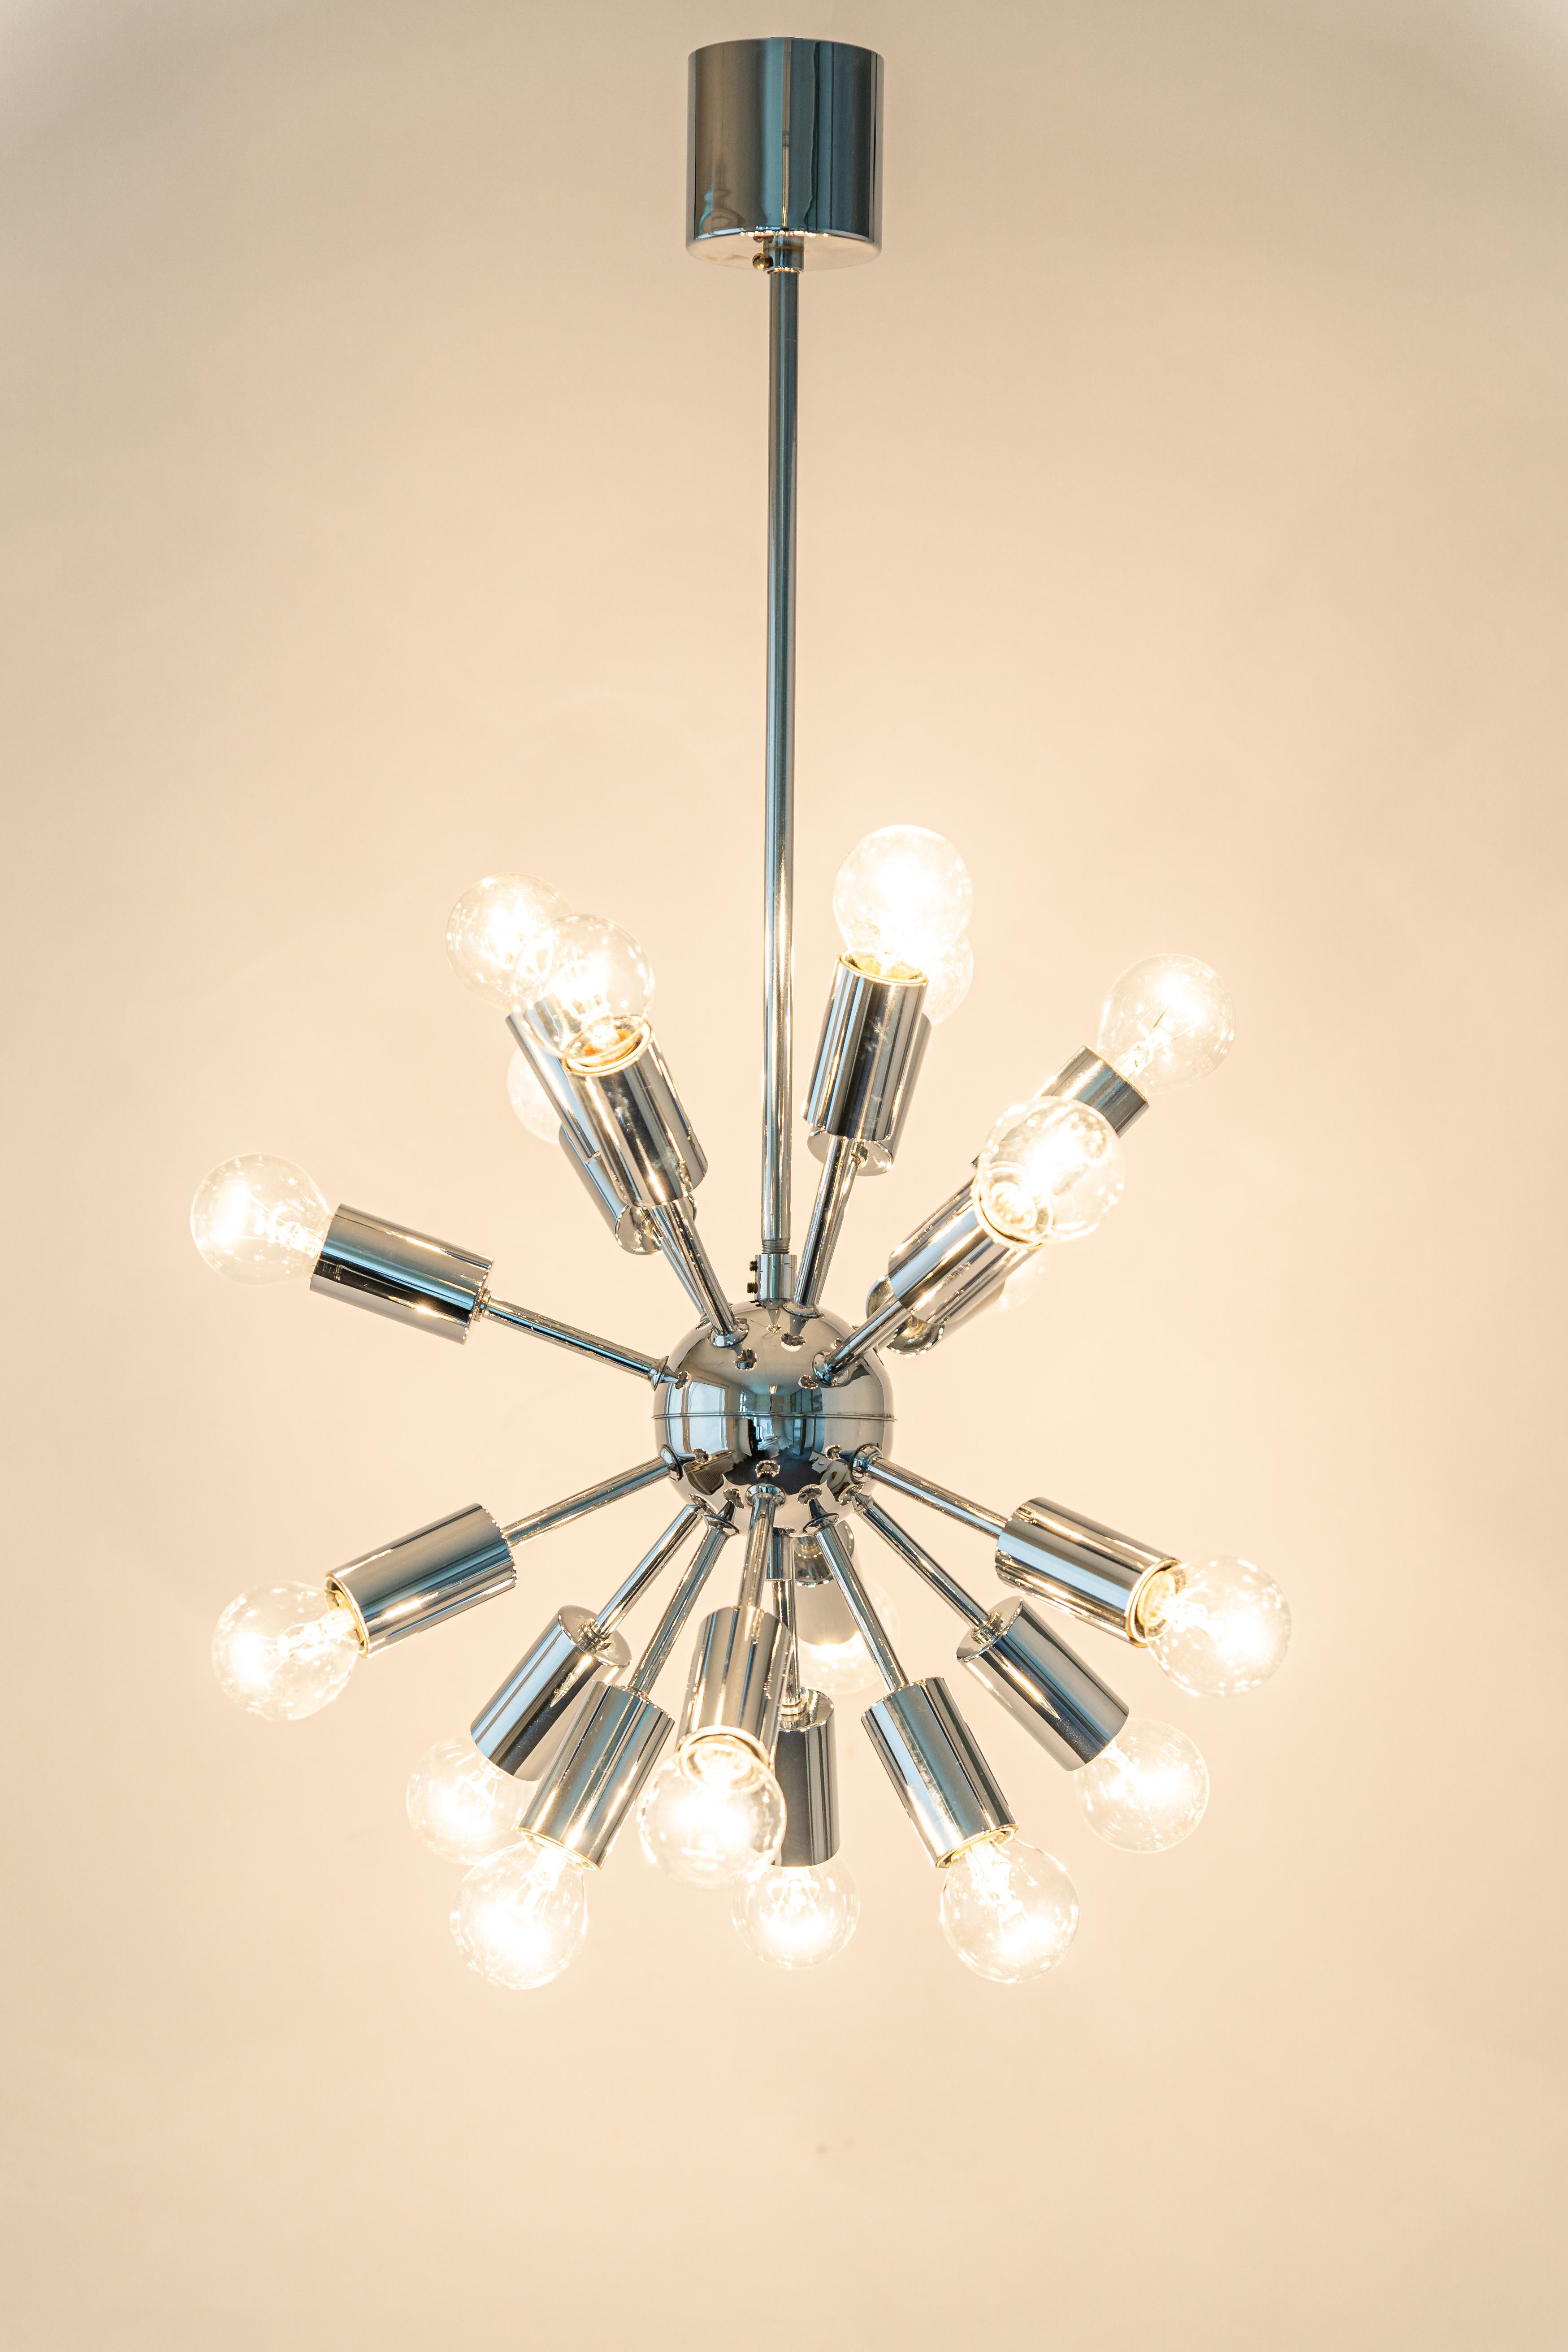 Stunning chrome Sputnik pendant light designed by Cosack during the 1970s.

Sockets: It needs 18 x E14 small bulbs.
Light bulbs are not included. It is possible to install this fixture in all countries (US, UK, Europe, Asia,